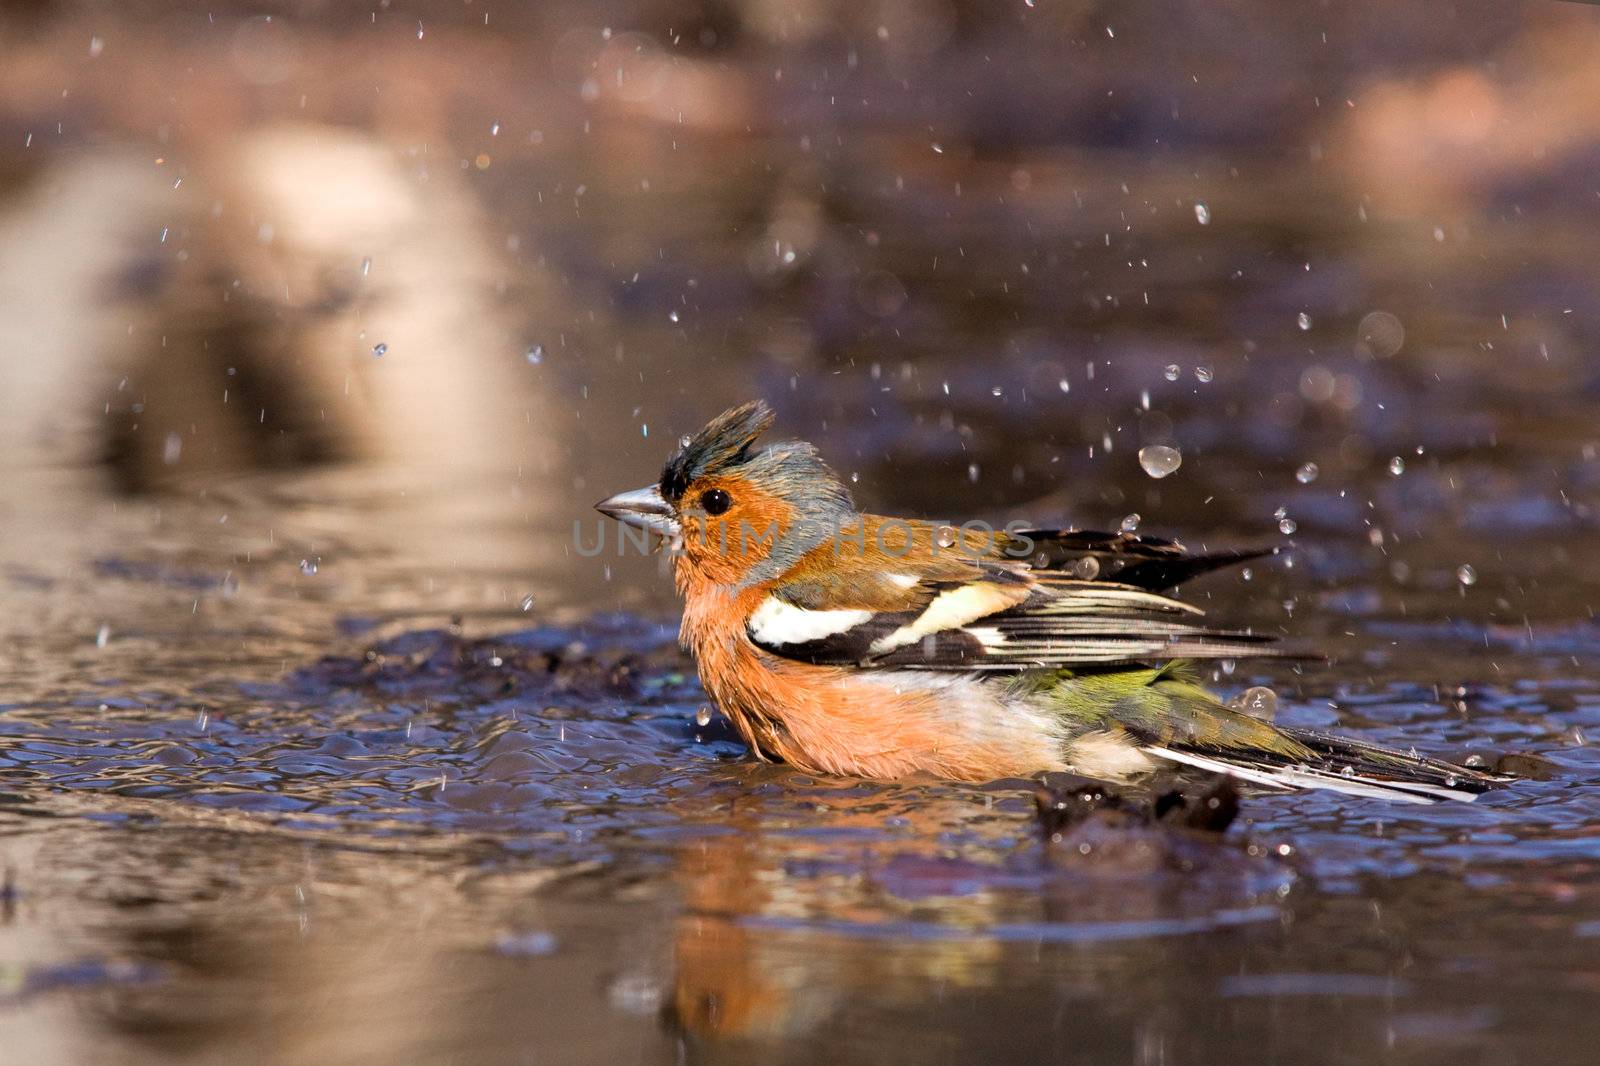 Chaffinch in the water by seawhisper